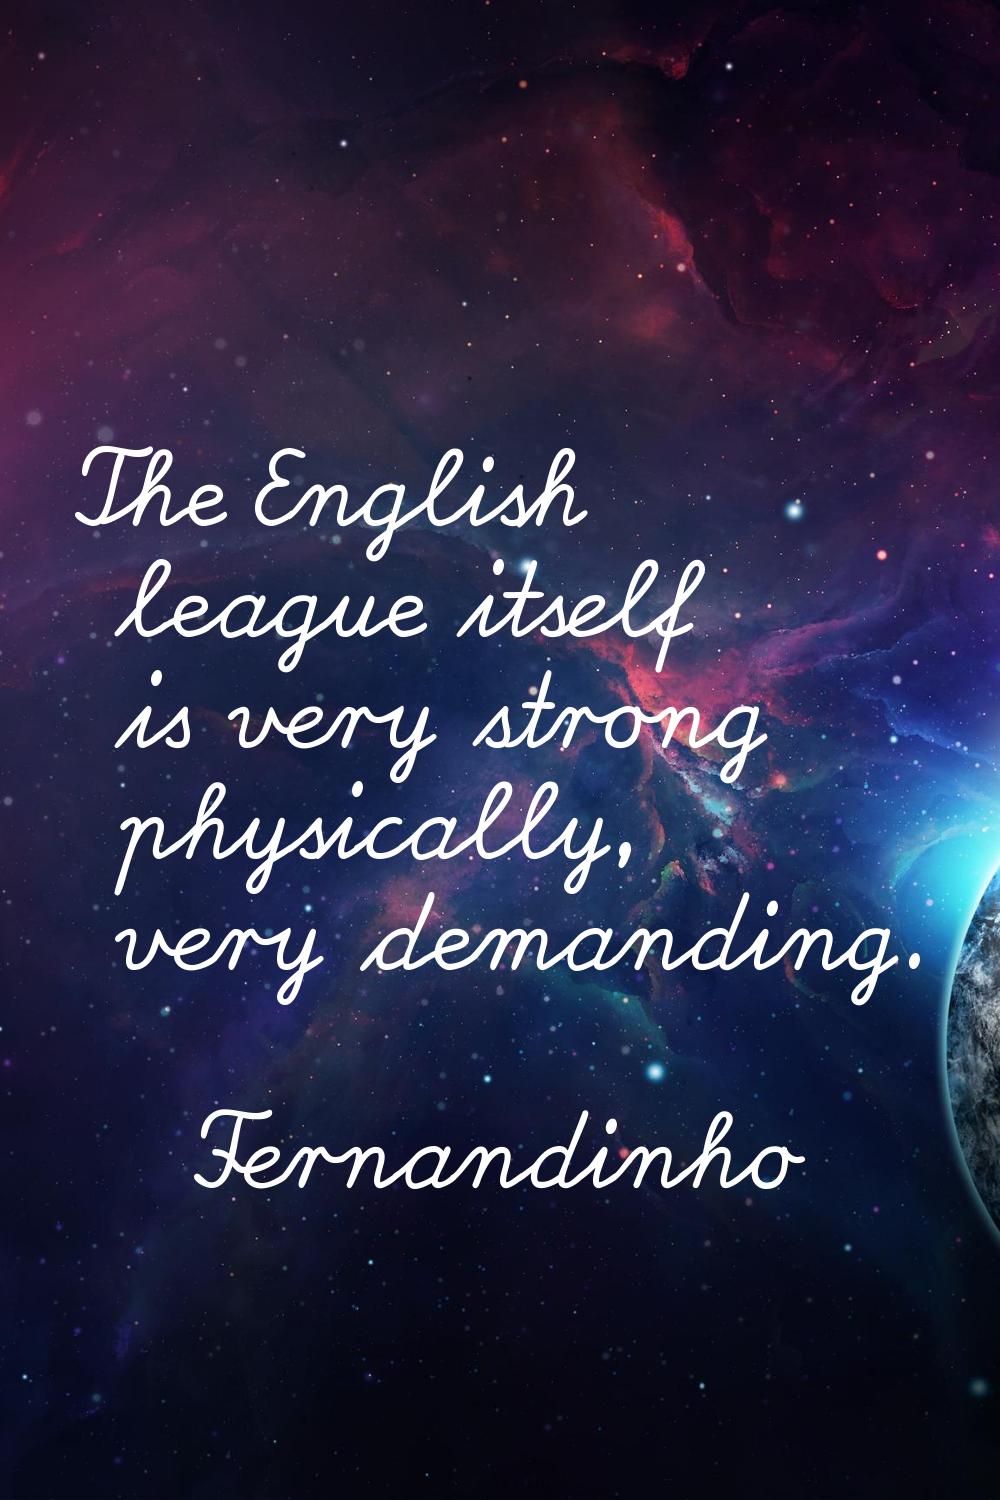 The English league itself is very strong physically, very demanding.